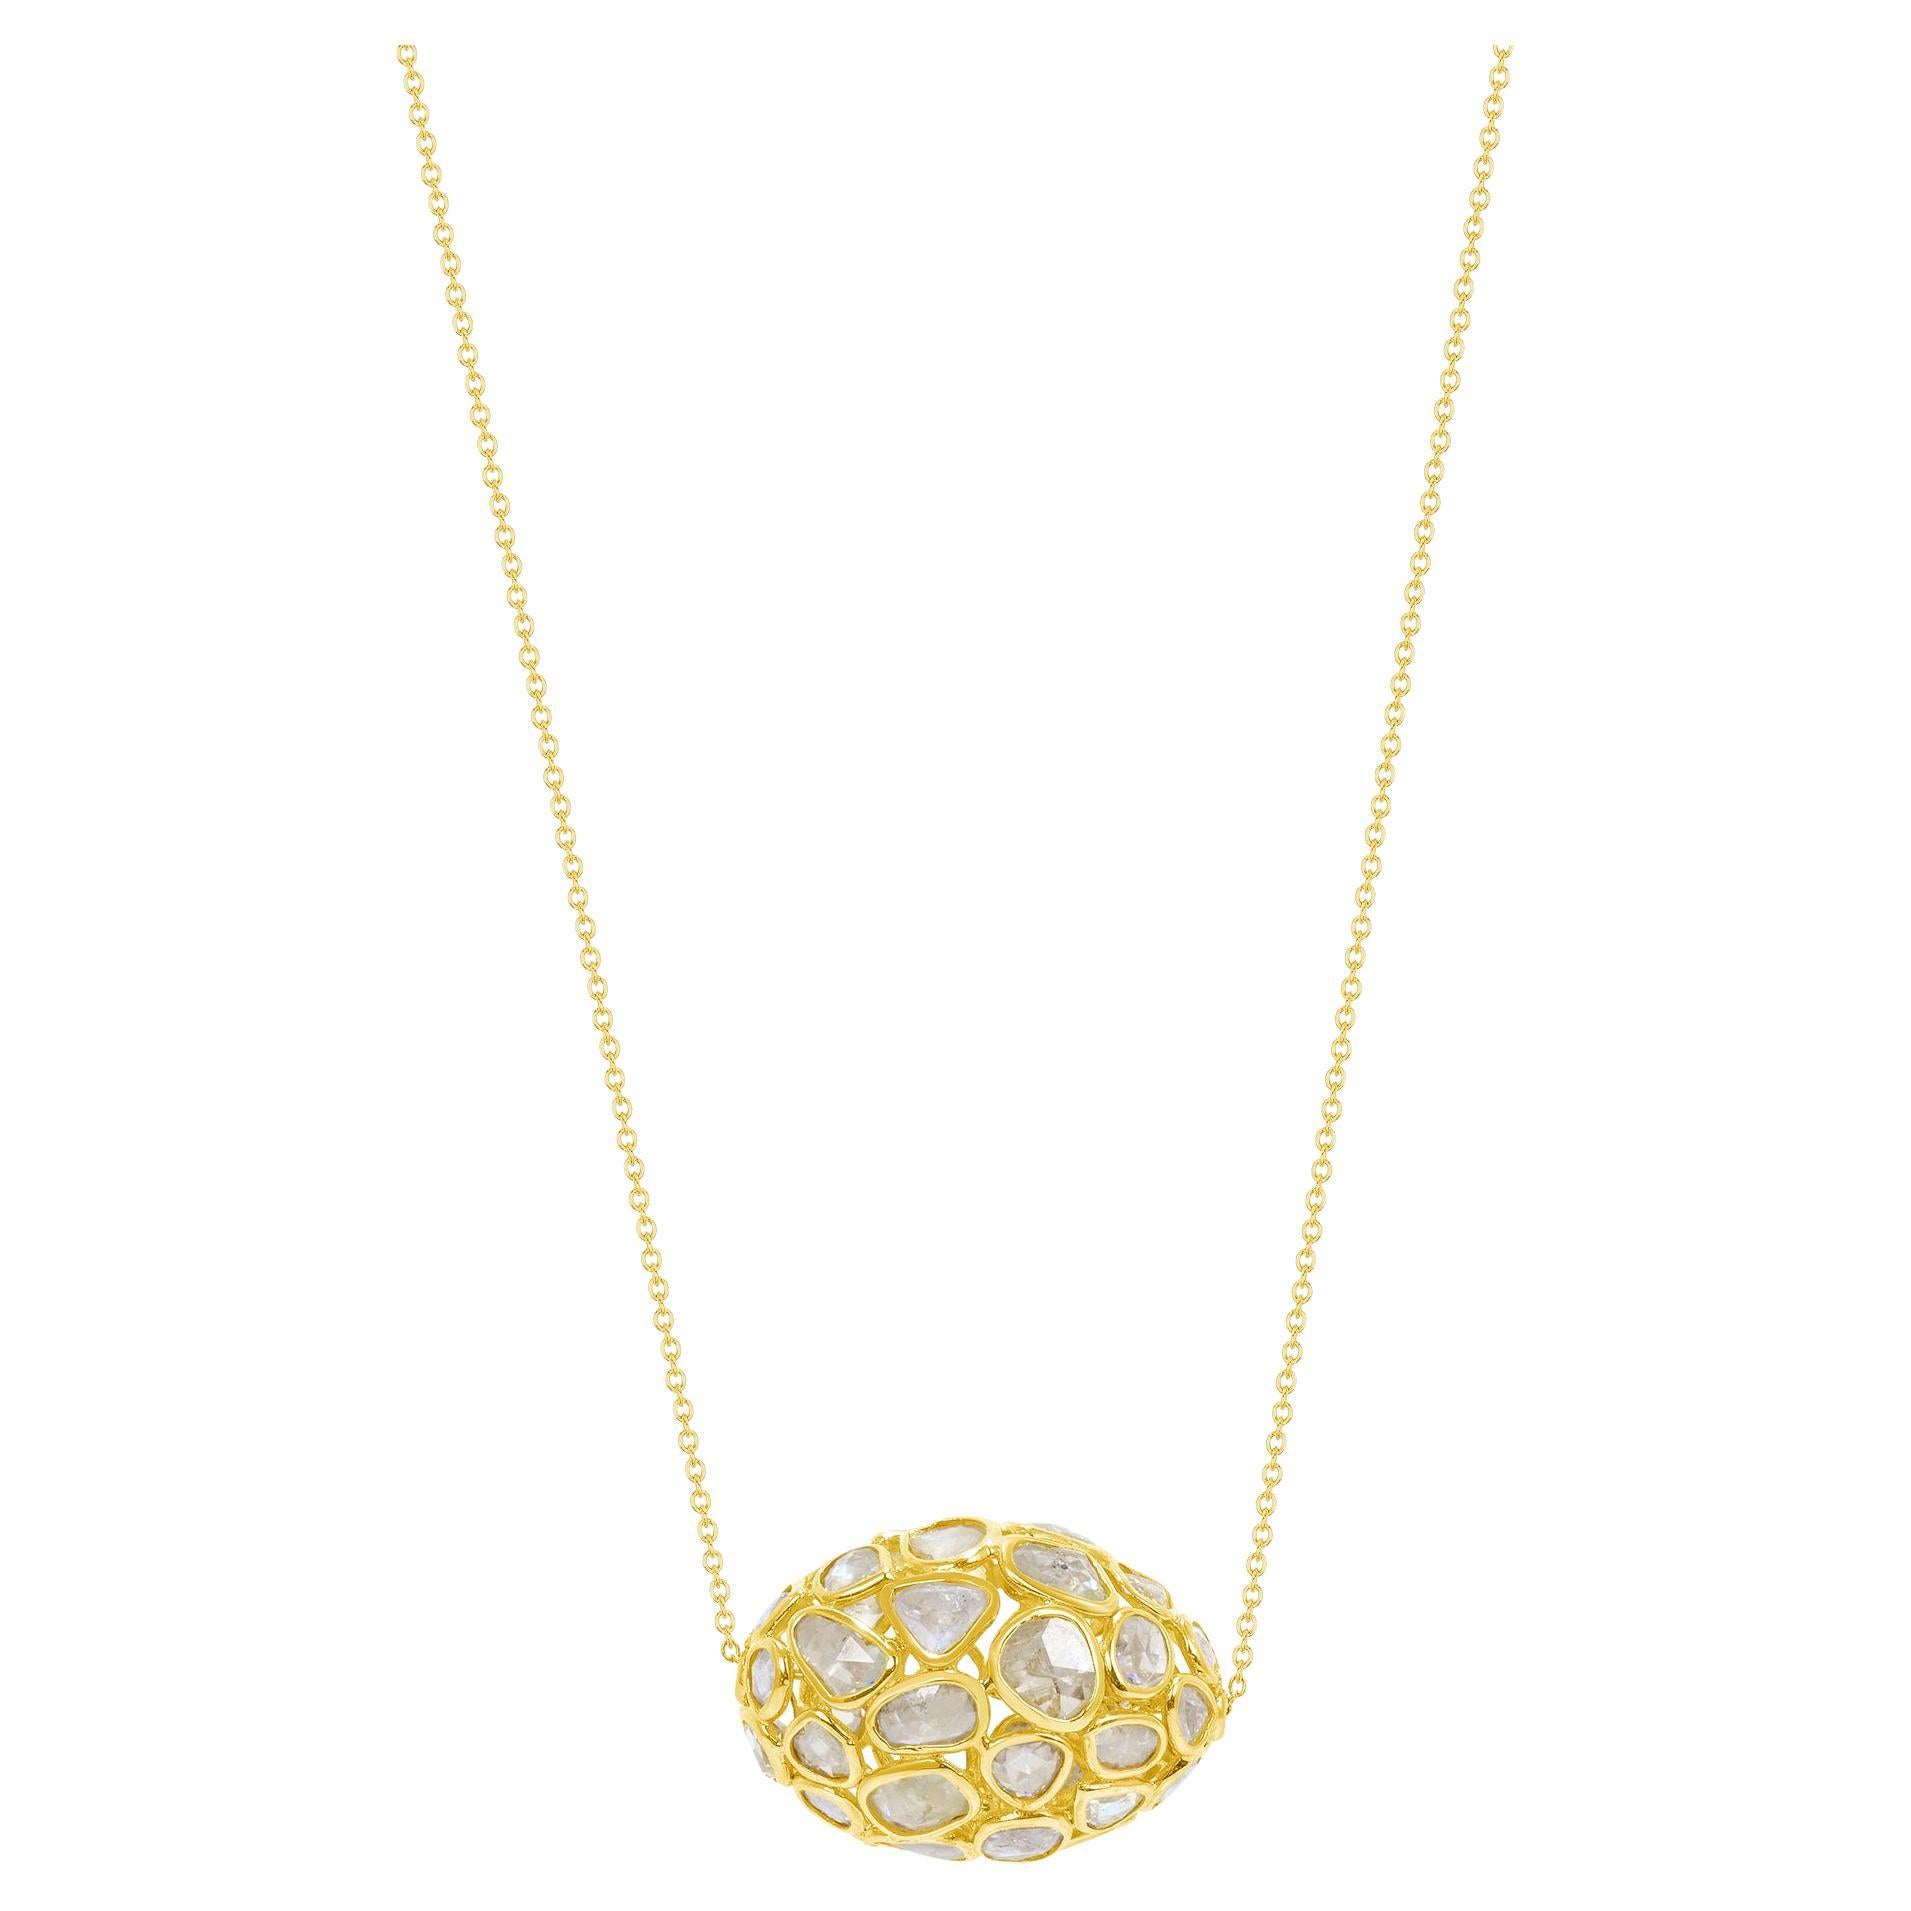 8.39 Carat Total Weight Diamond Yellow Gold Pendant Necklace, in Stock